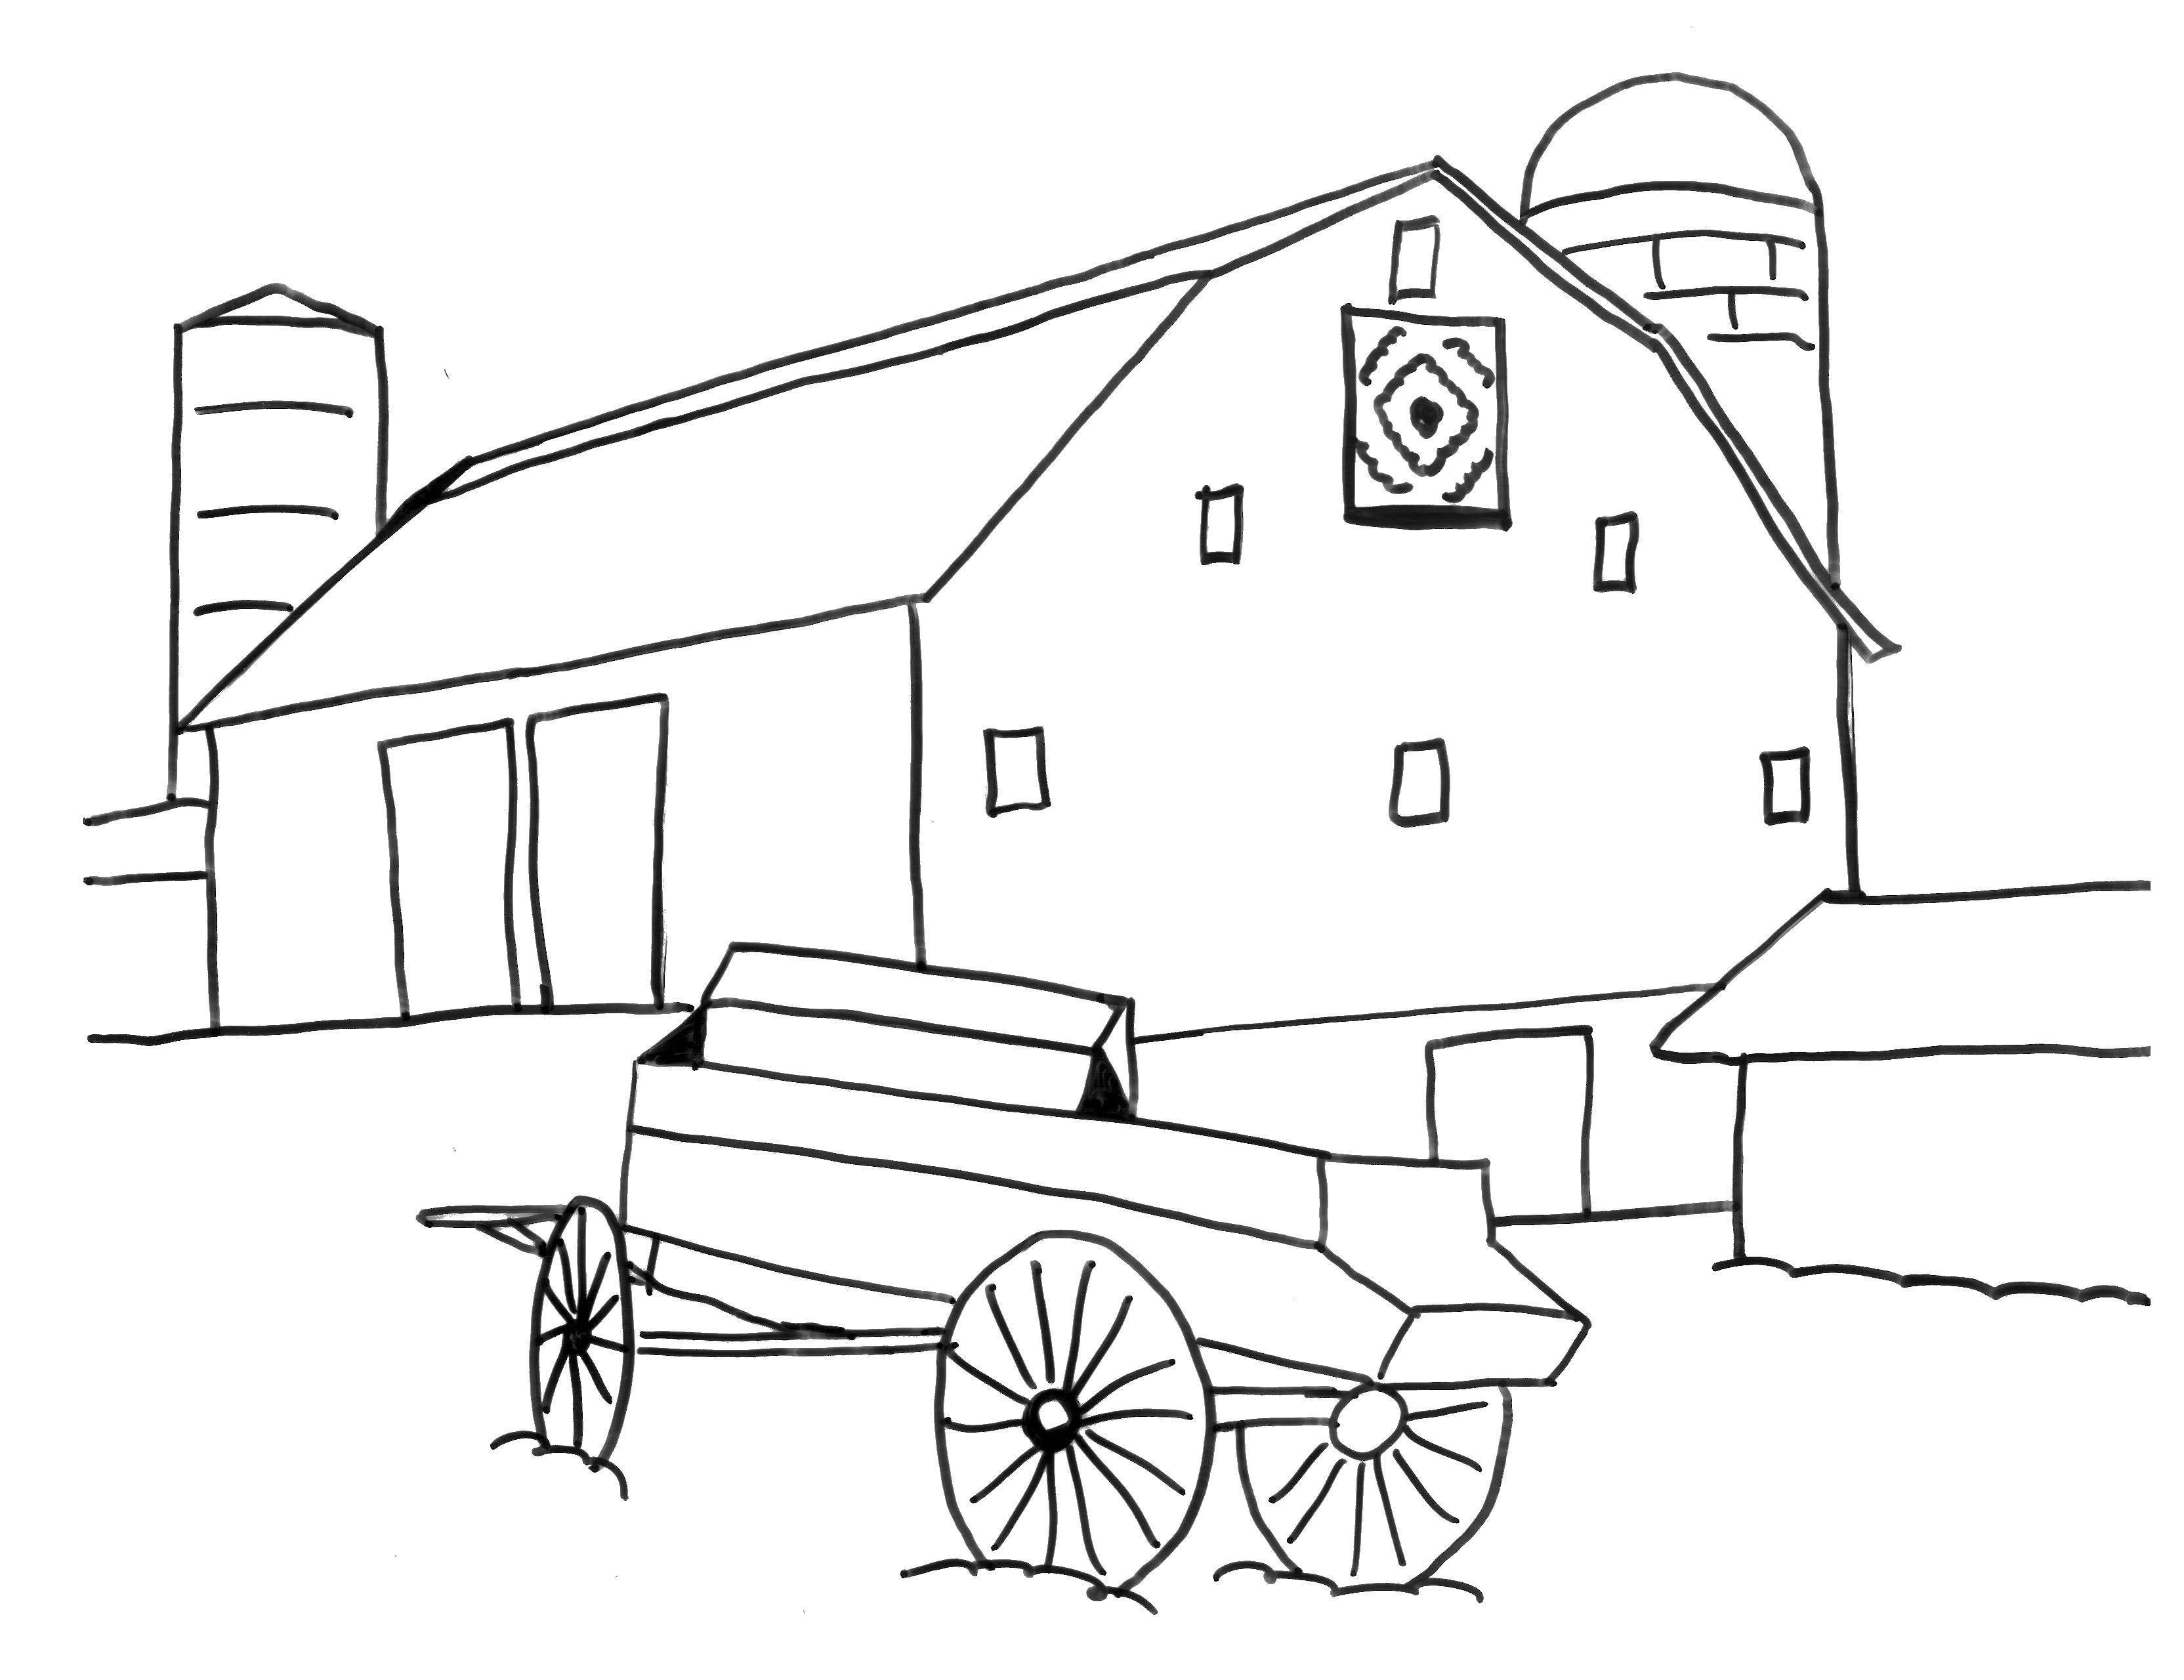 Coloring Cart at home. Category farm. Tags:  farm, animals.